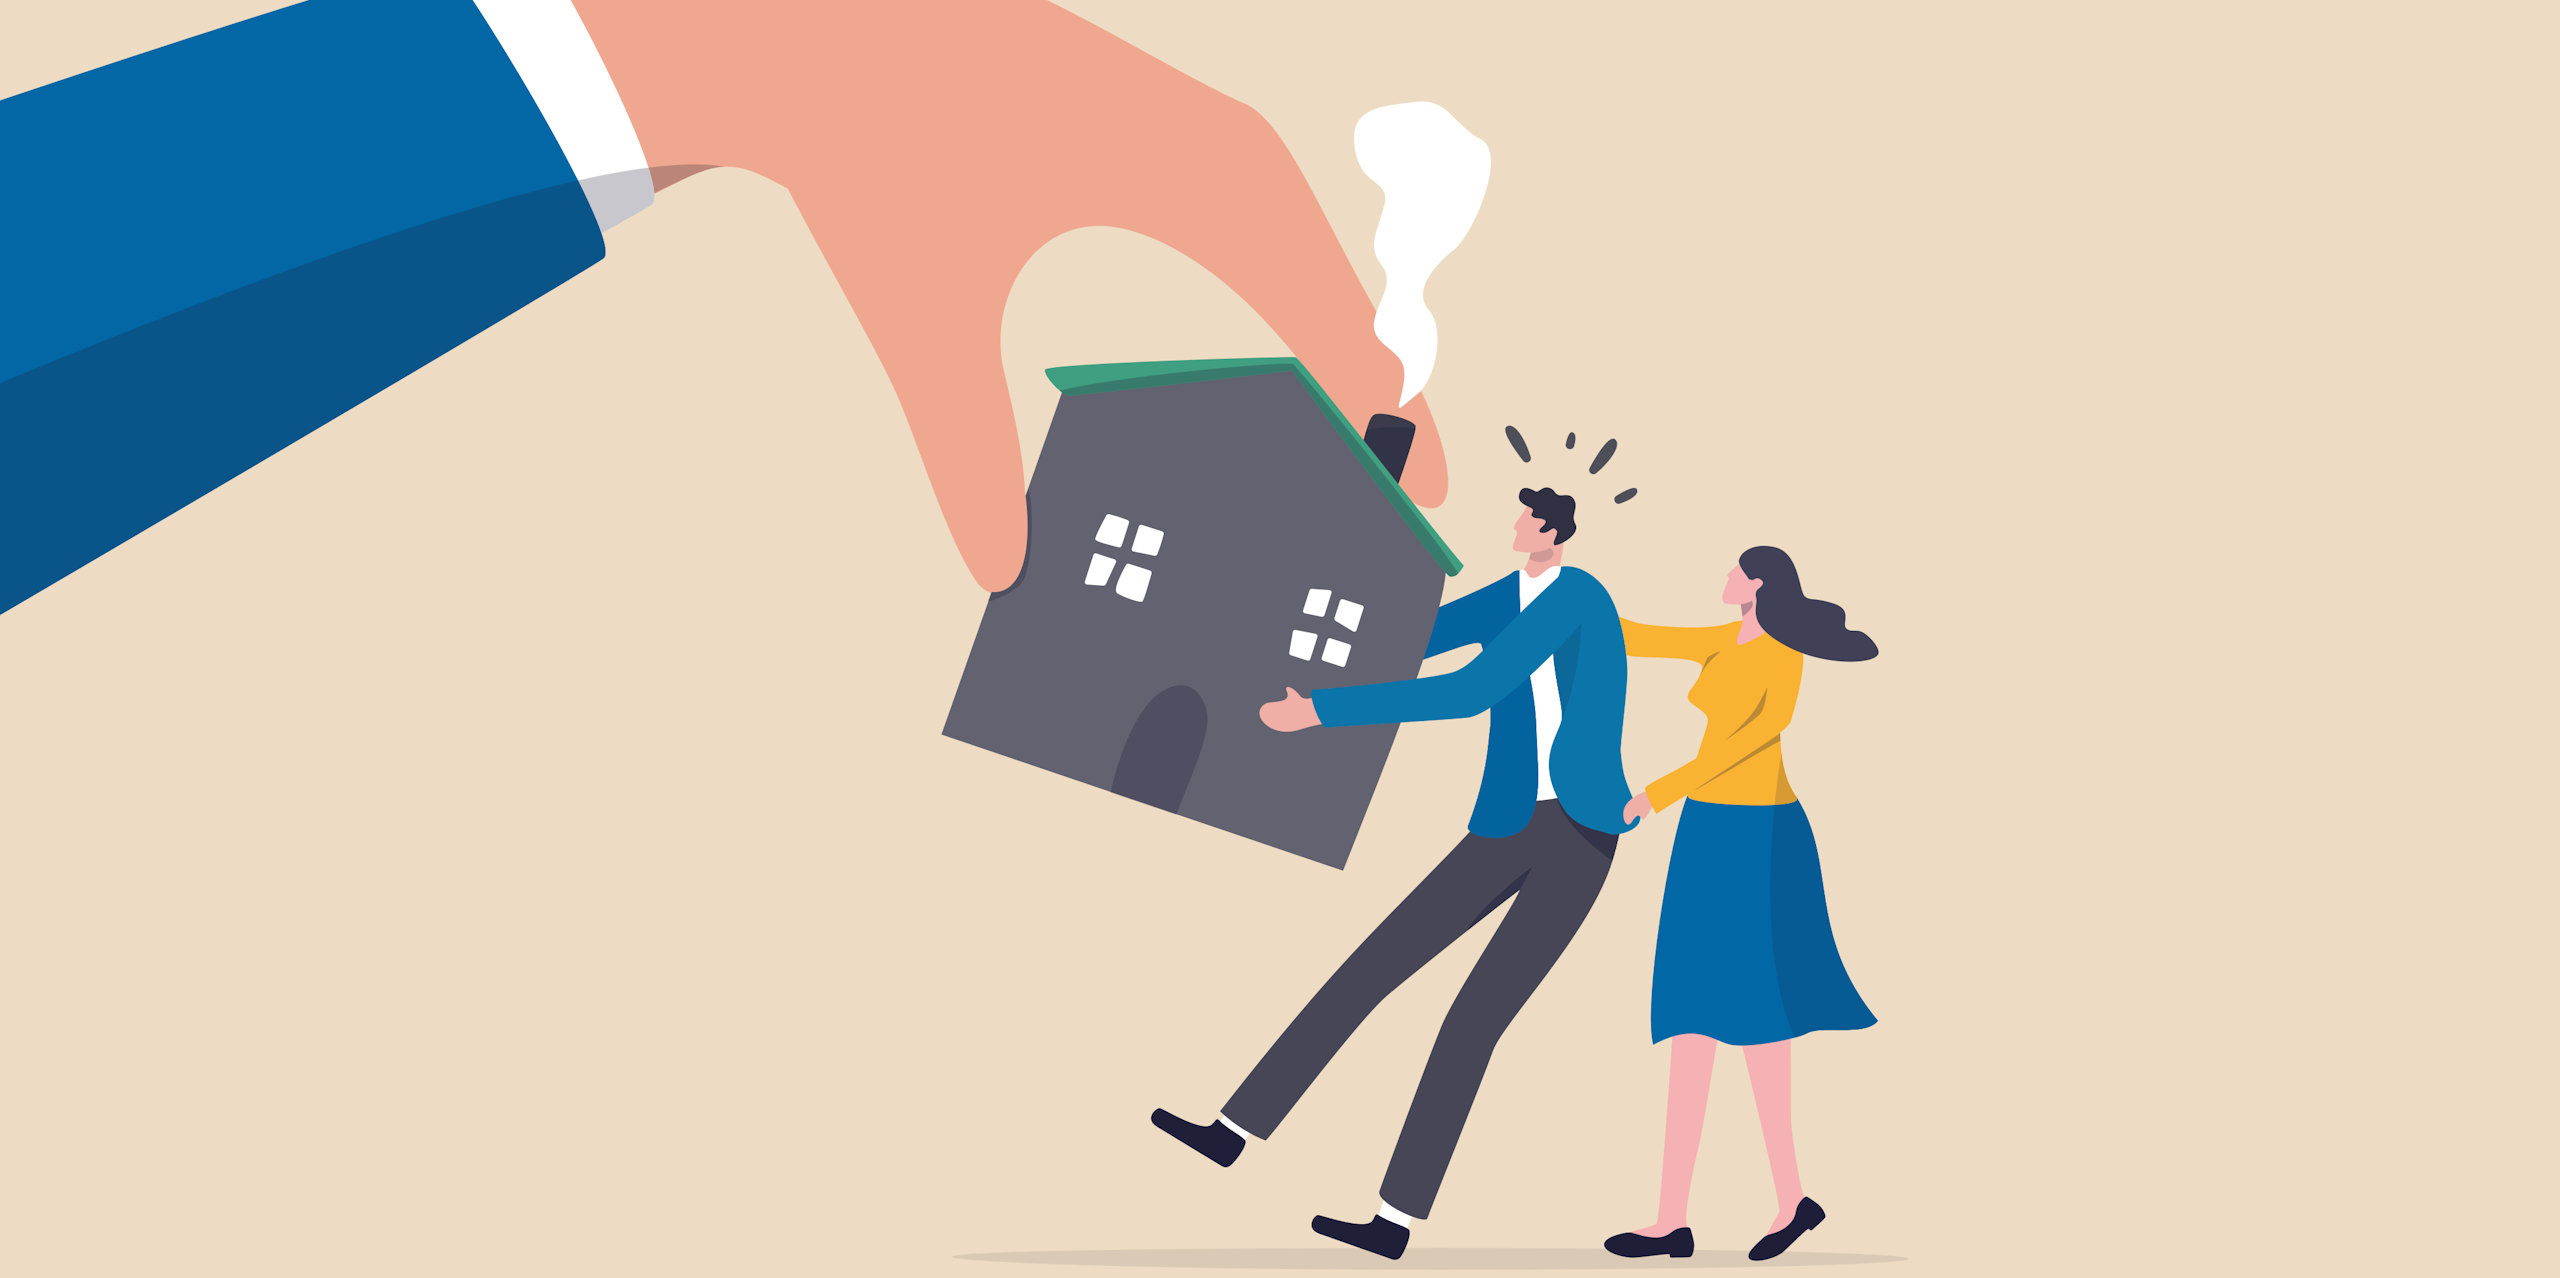 An illustration of a large hand picking up a house with a man and woman trying to hold onto a house.